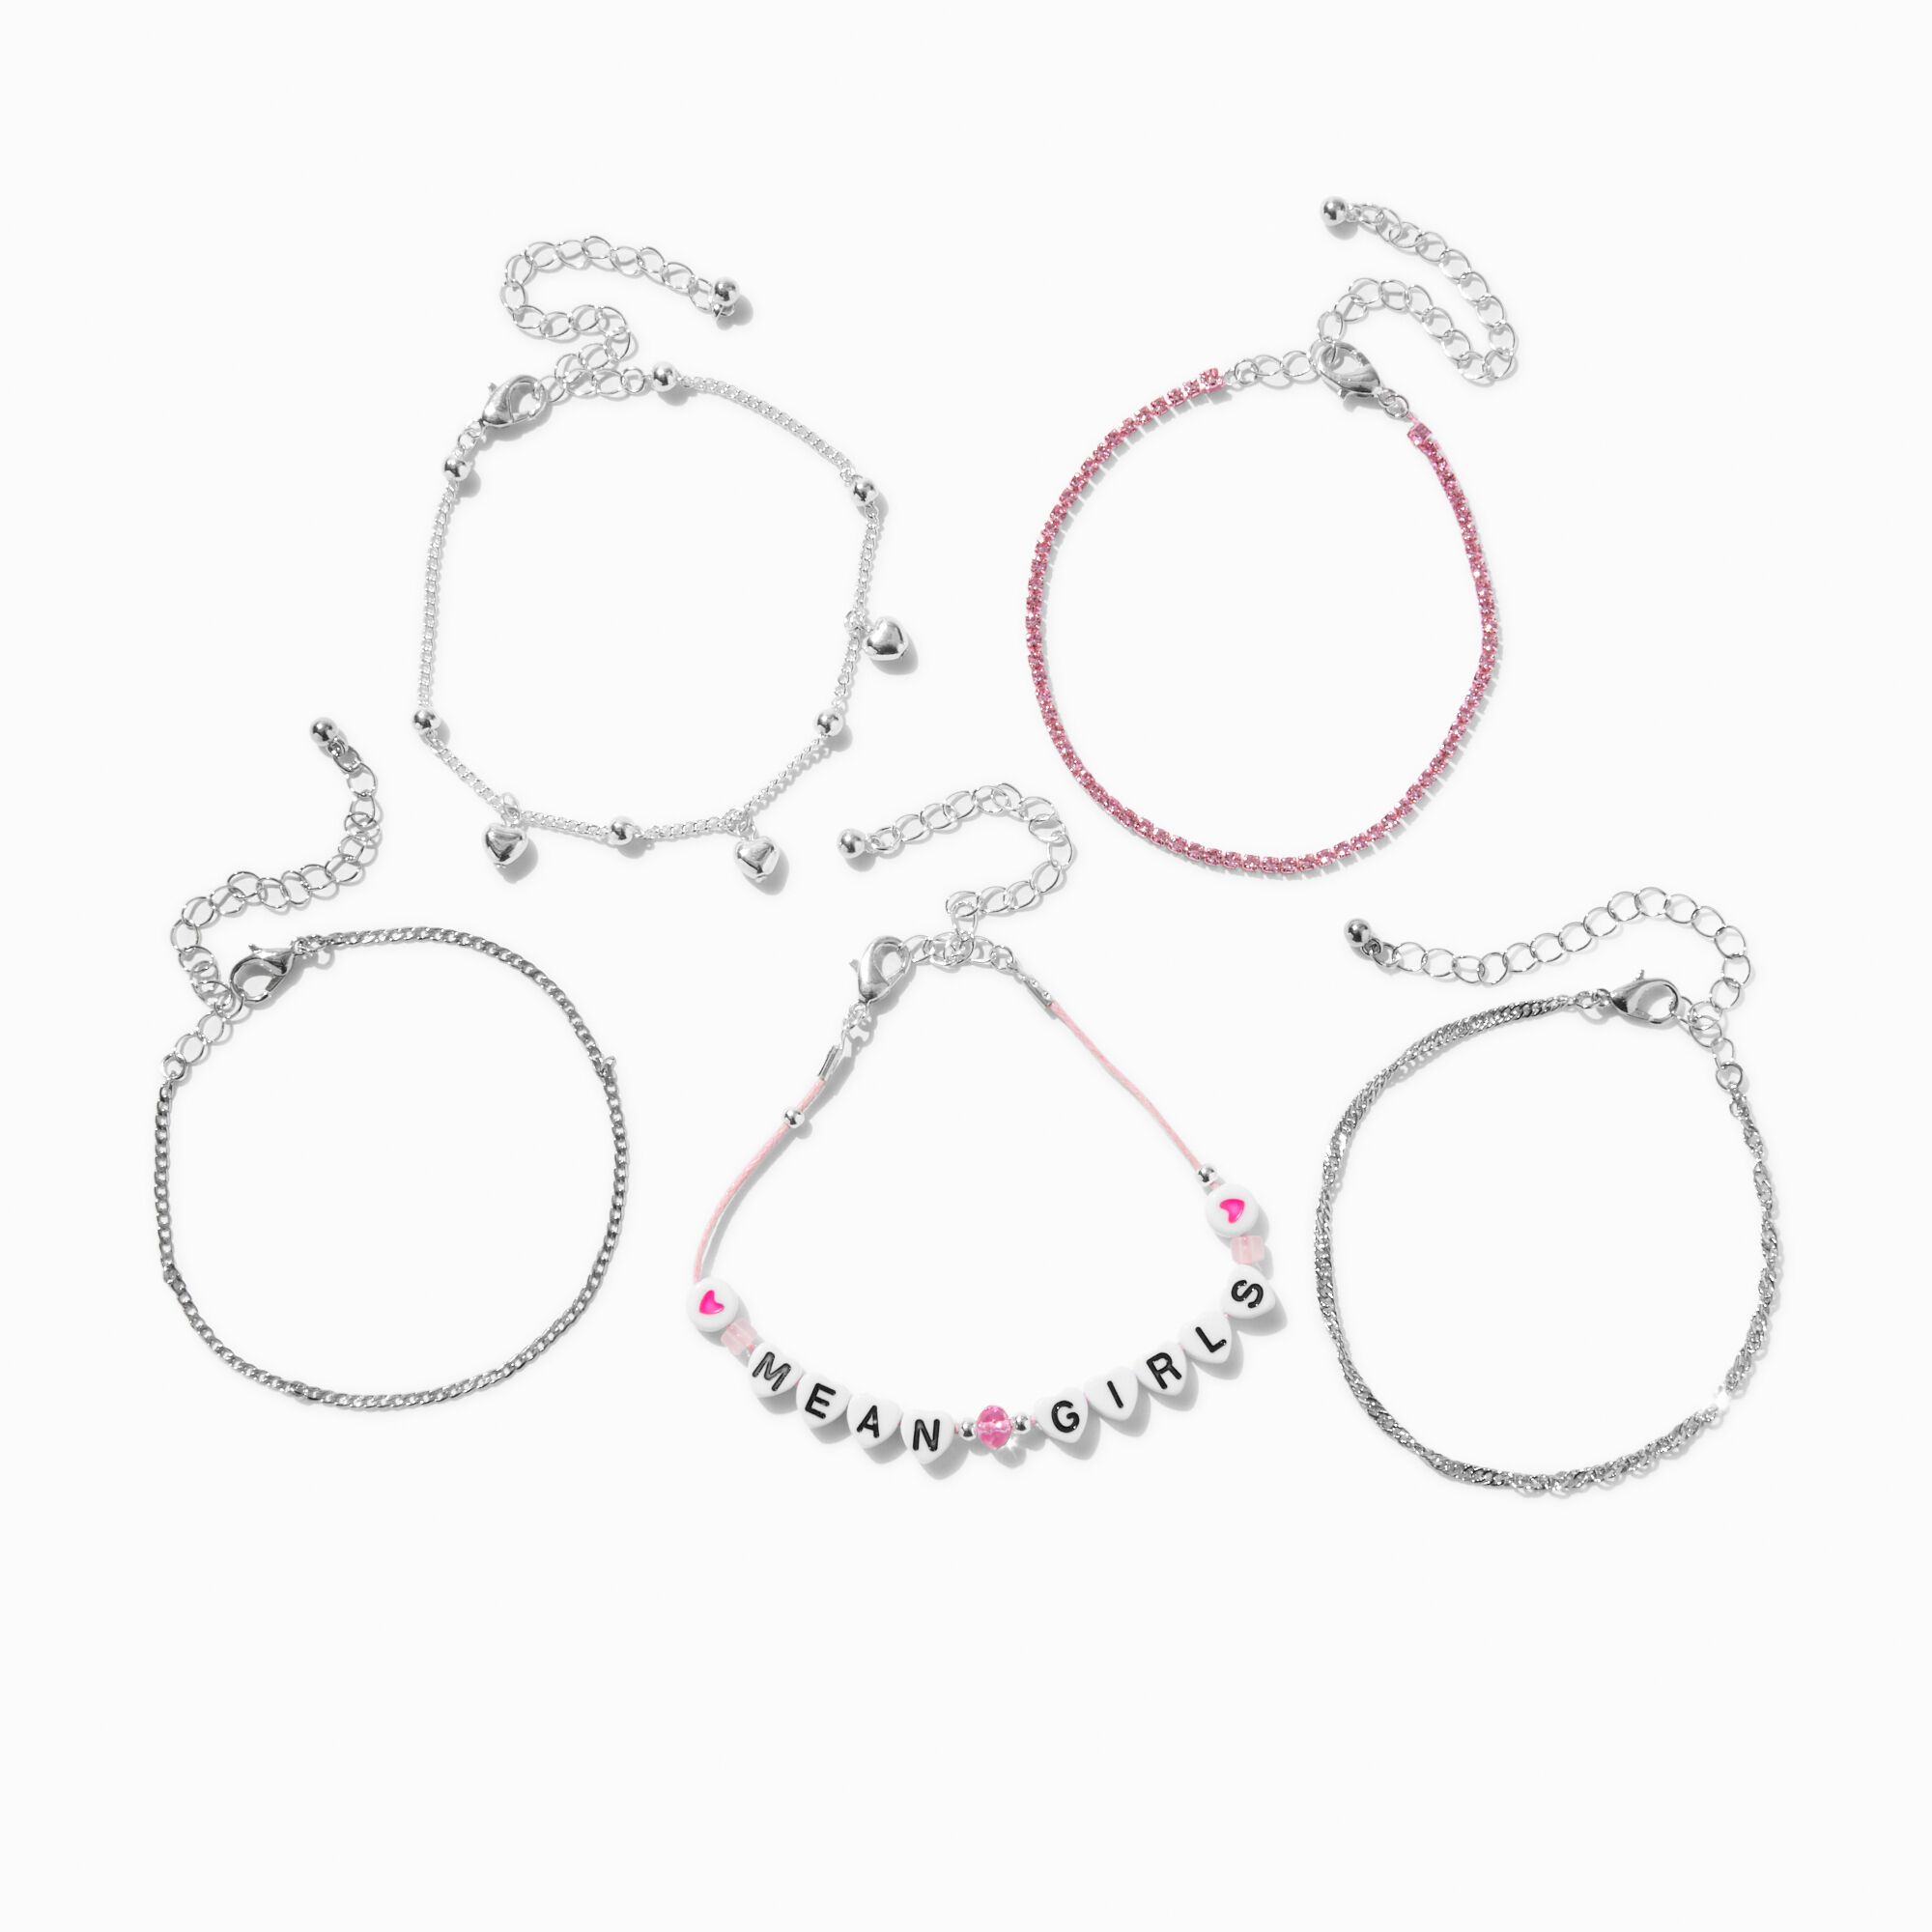 View Mean Girls X Claires Tone Bracelet Set 5 Pack Silver information